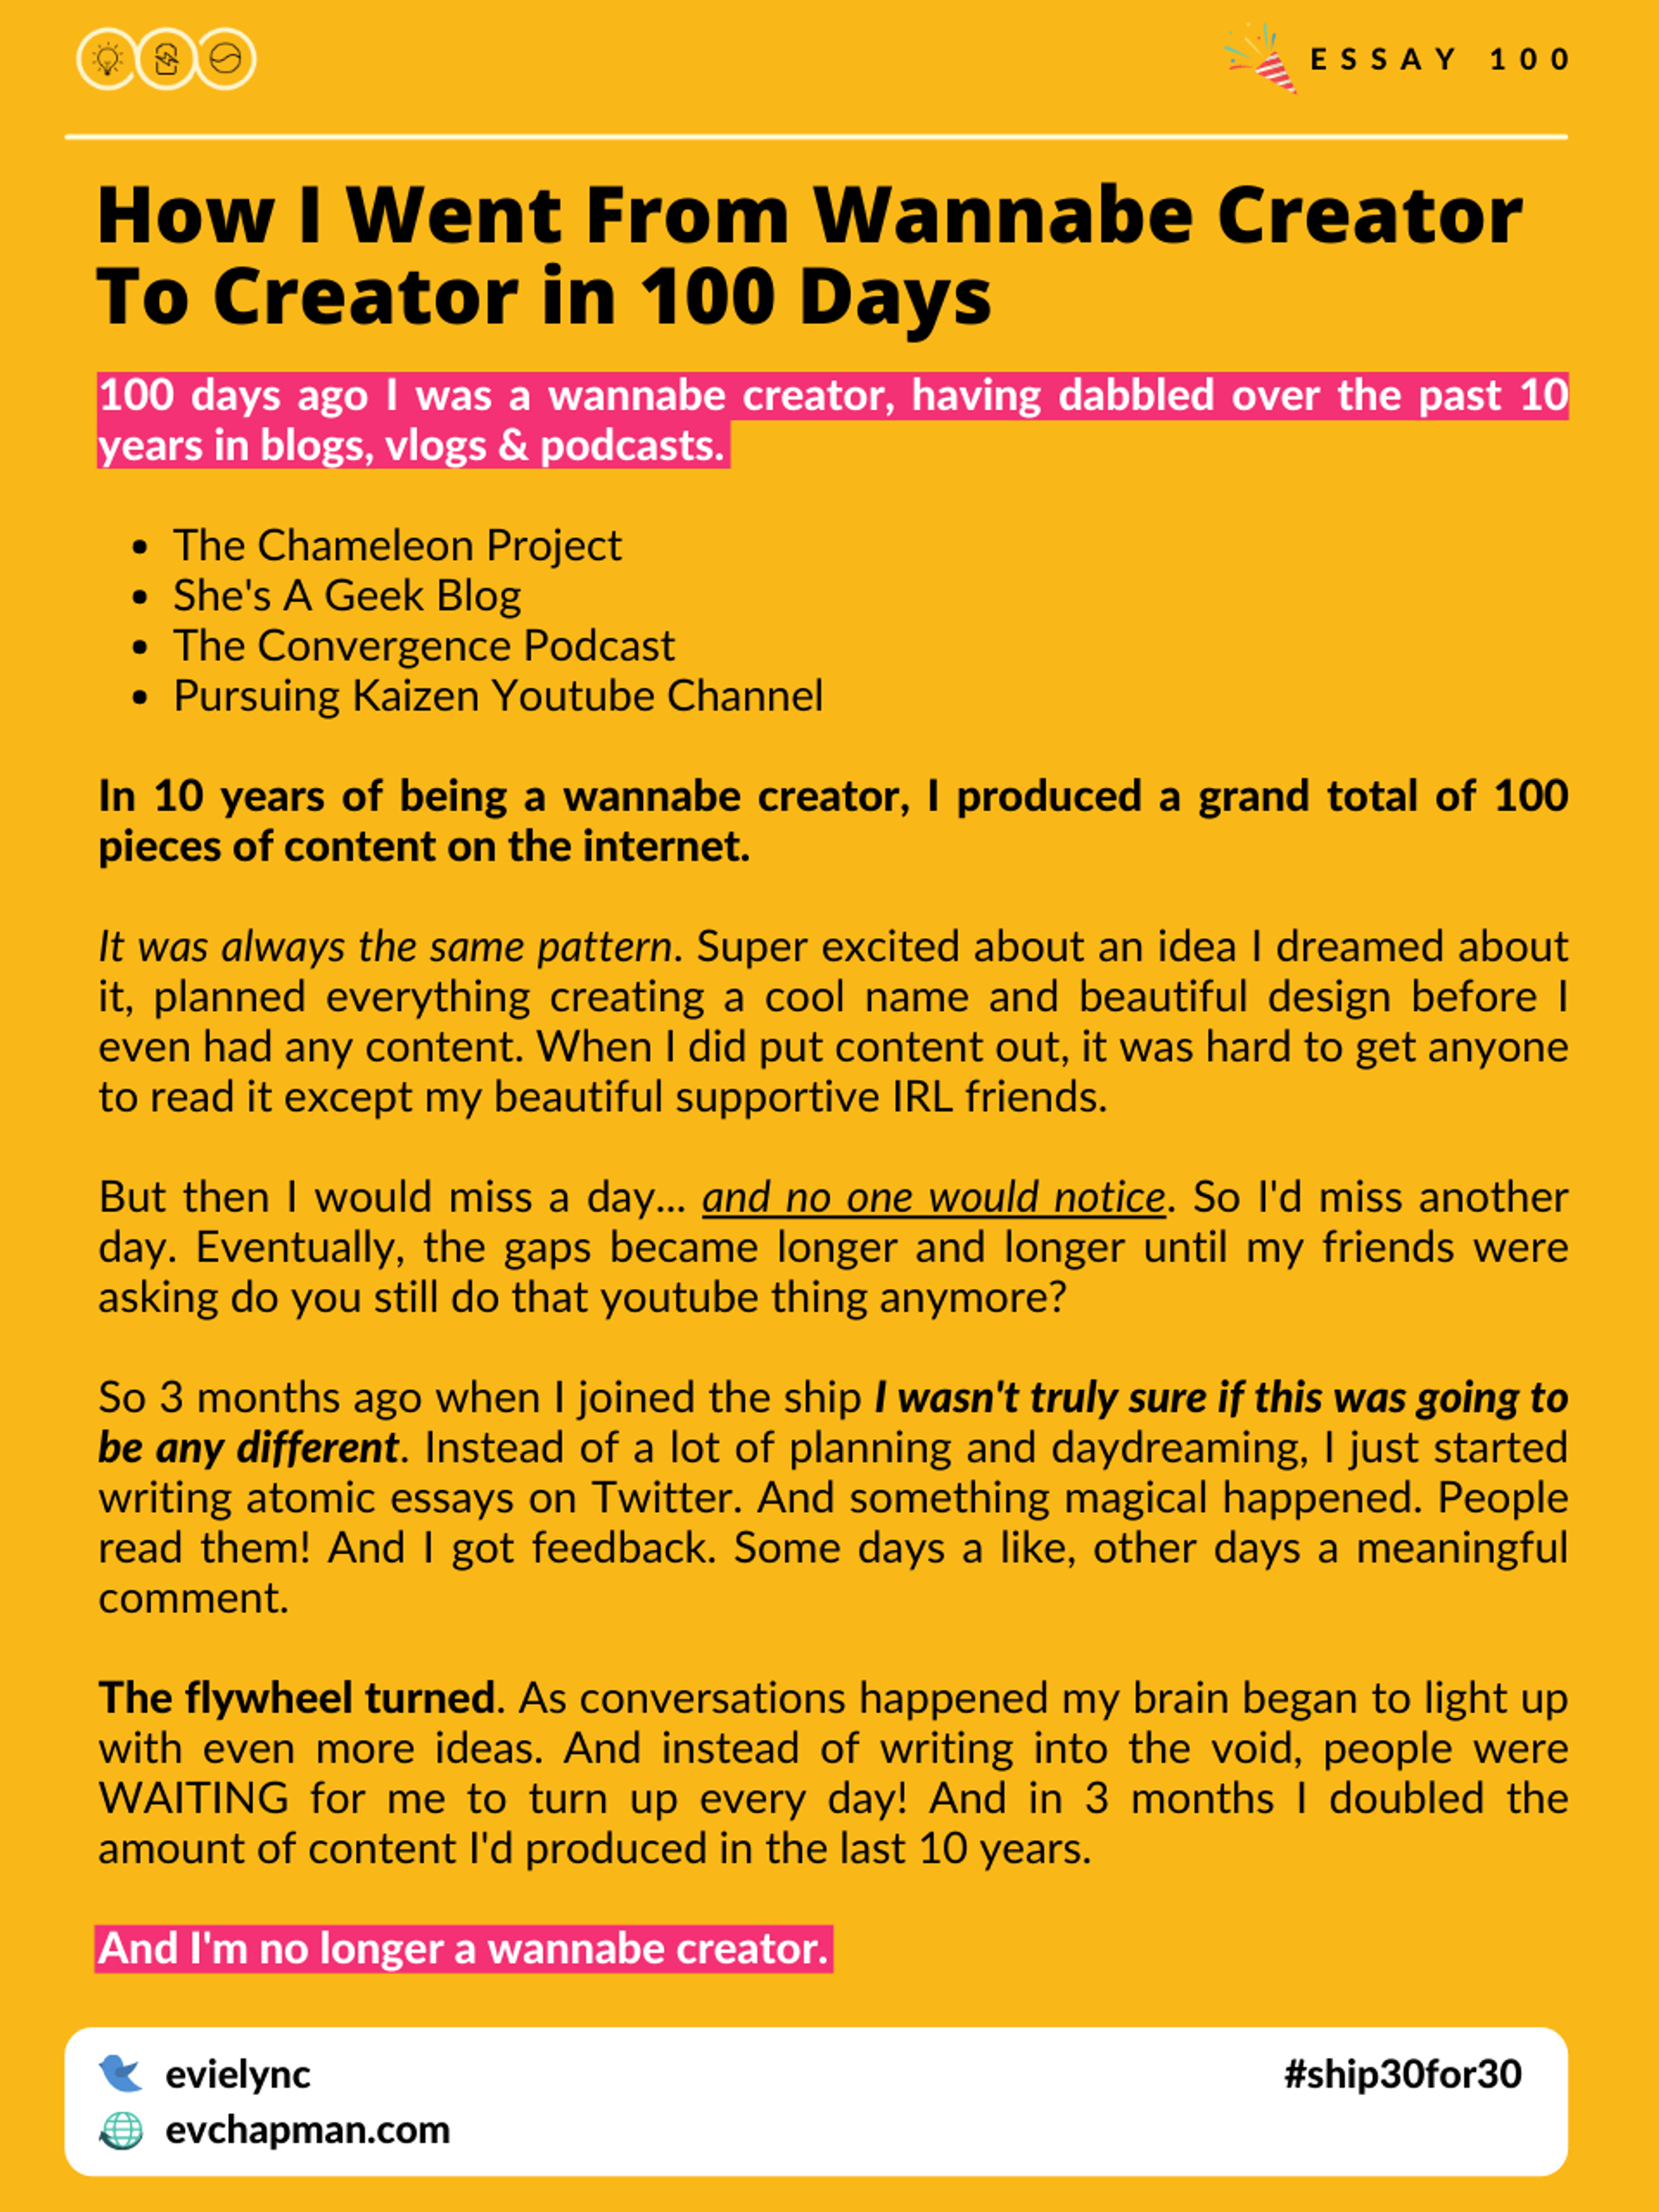 How I Went From Wannabe Creator To Creator in 100 Days